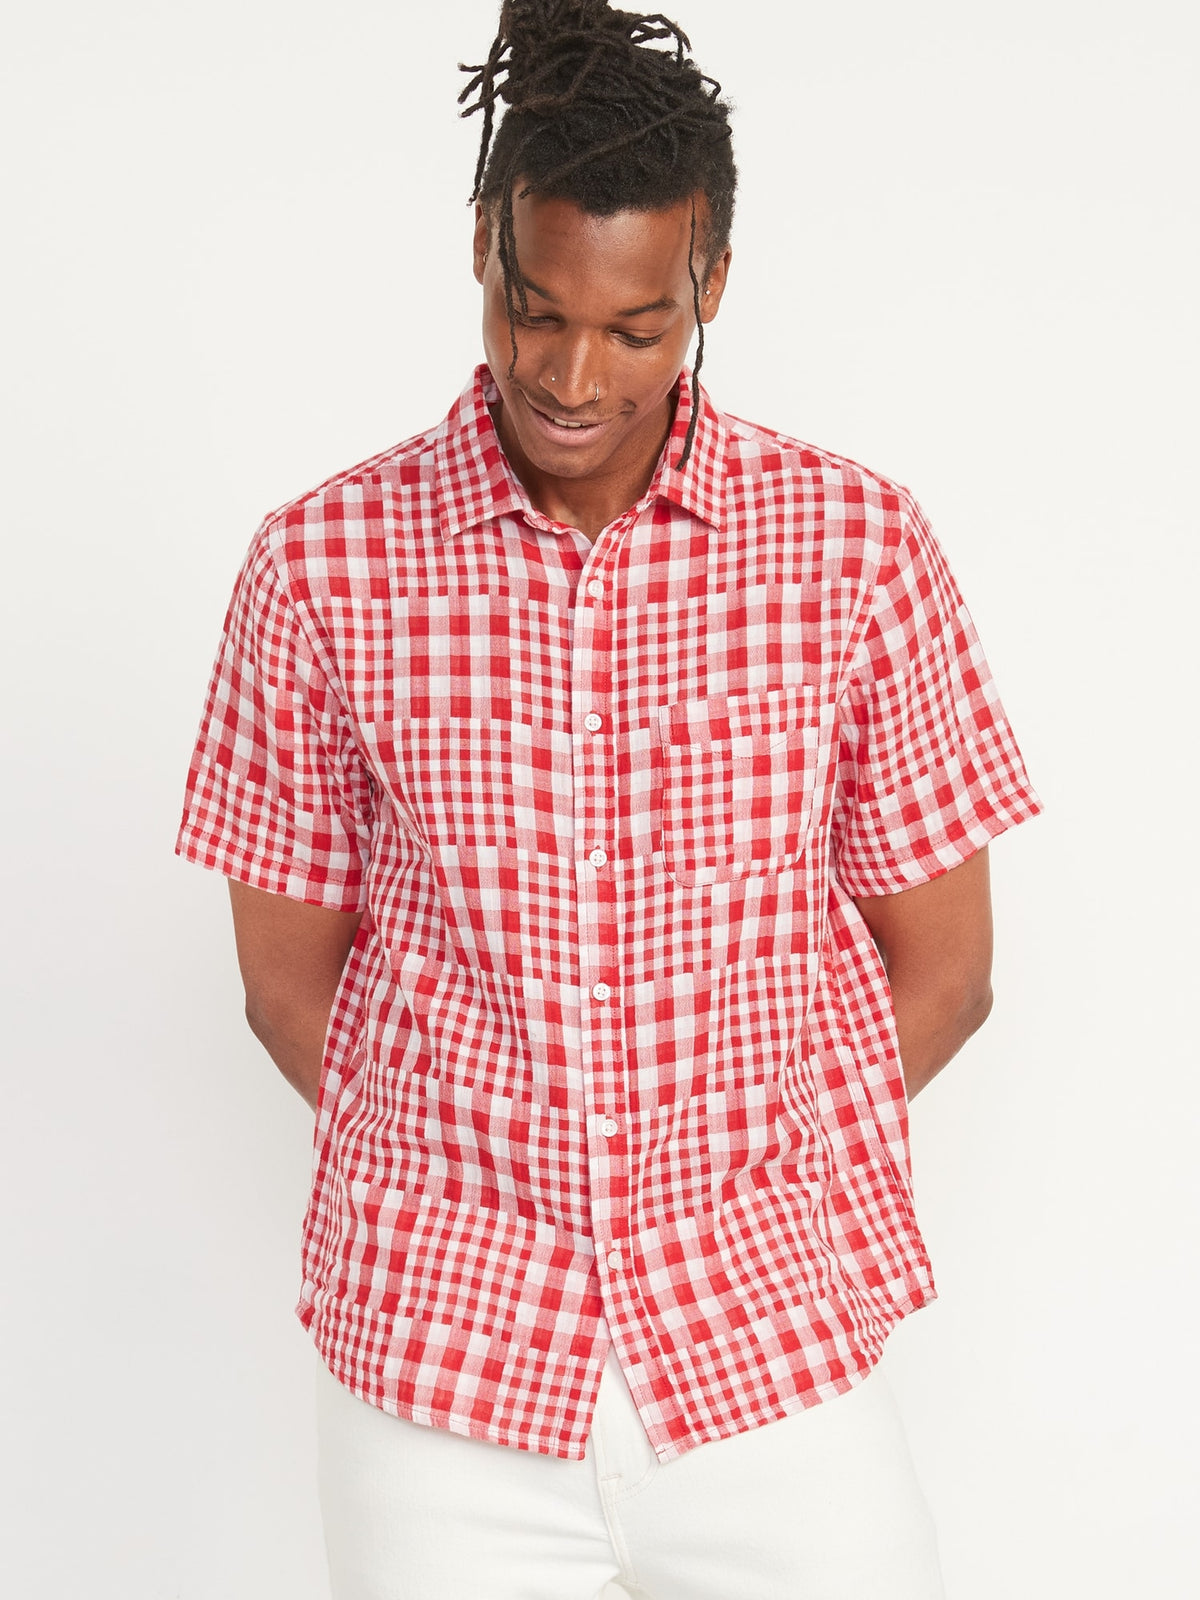 Red Gingham (Match The Fam)